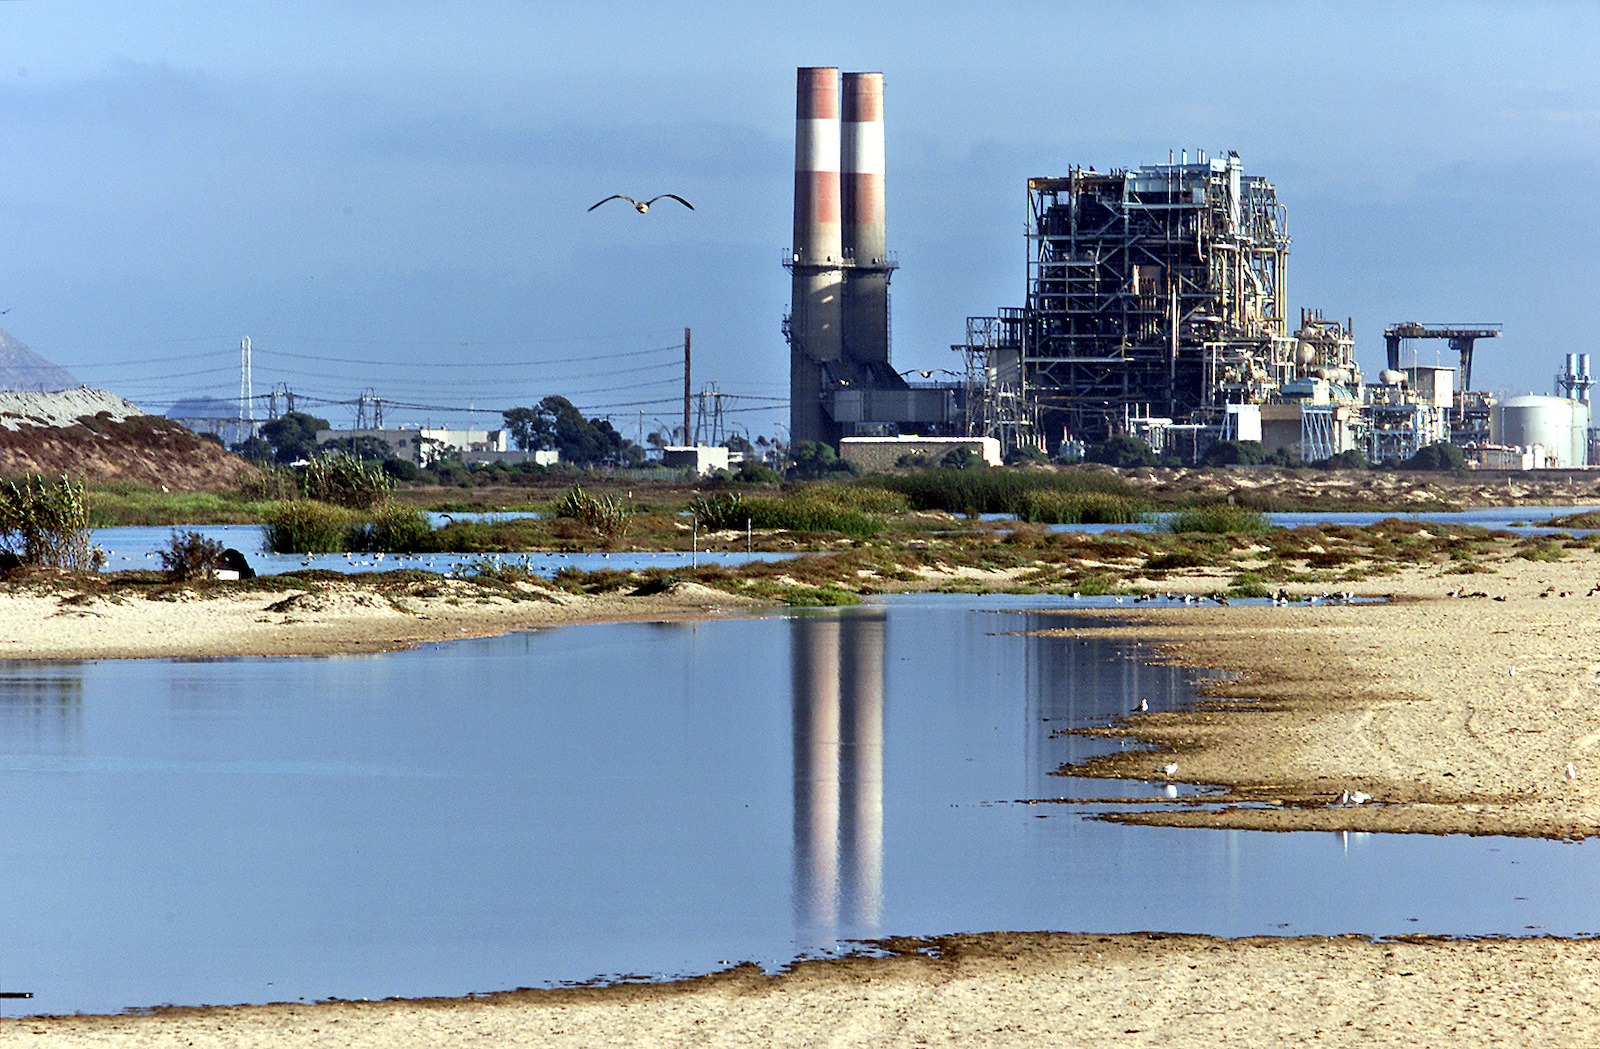 The Ormond Beach Wetlands Reliant Power Plant is one of more than 400 poison gas plants in California at risk from severe flooding before 2100.